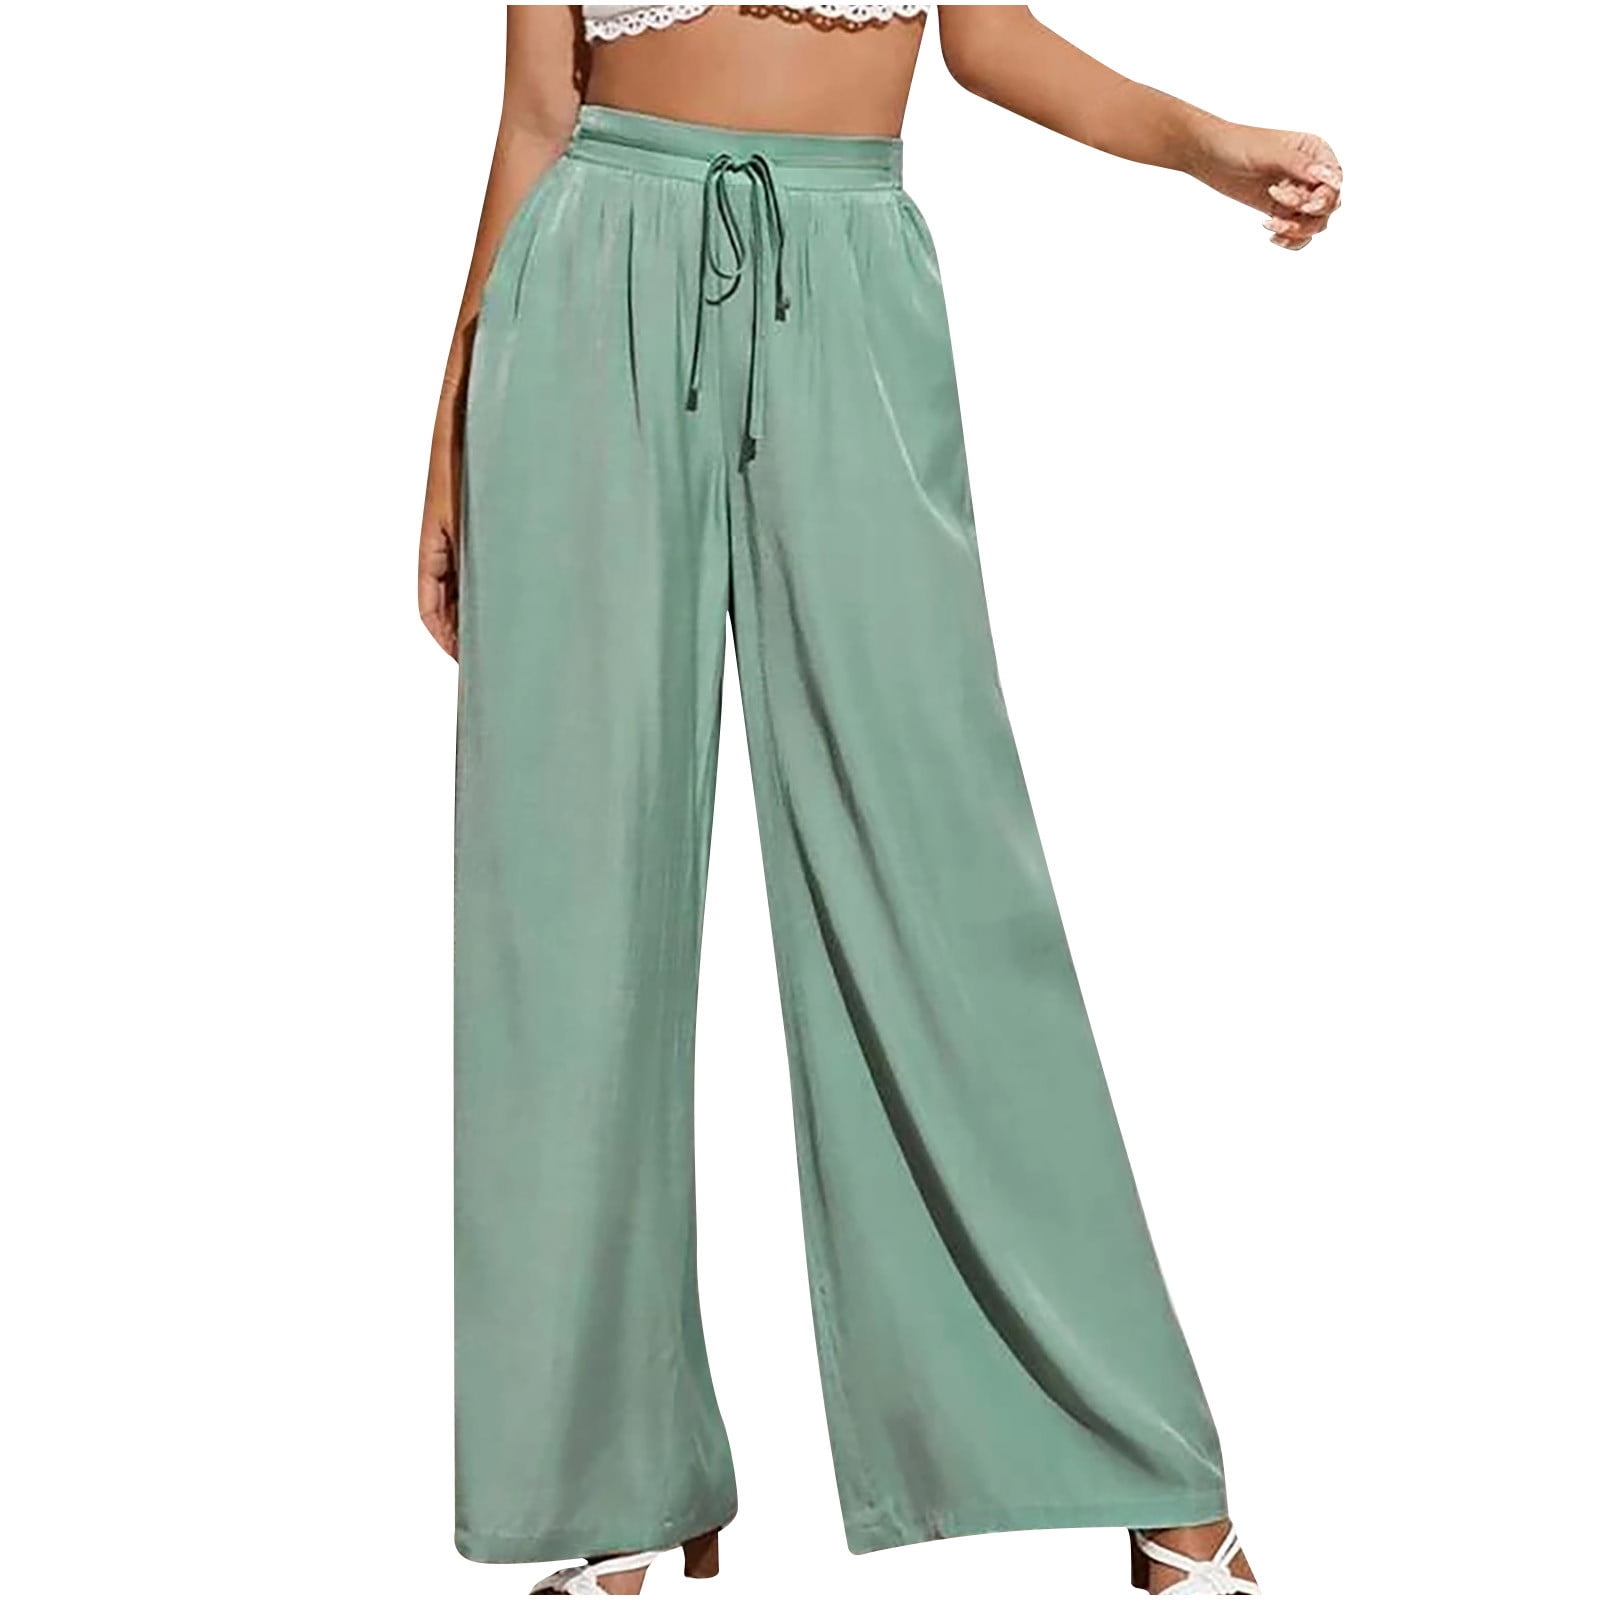 Booker Women's Fashion Casual Stretchy Wide Leg Palazzo Pants Summer  Leisure High Waist Beach Wide Leg Pants Loose Comfortable Color Pants  Trousers